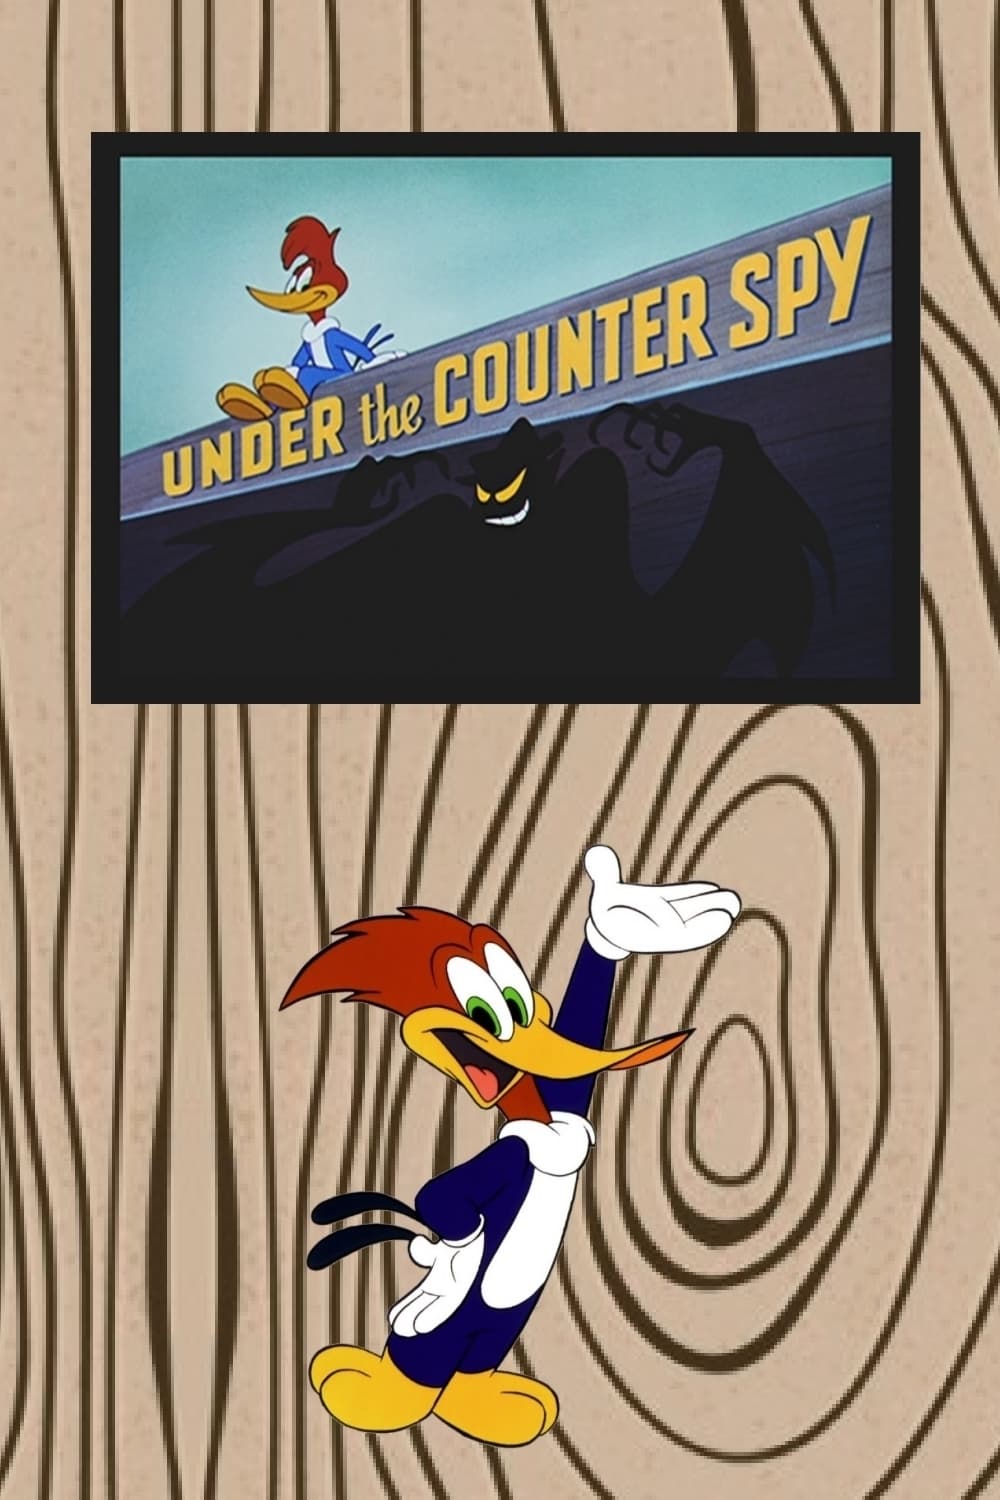 Under the Counter Spy (1954)